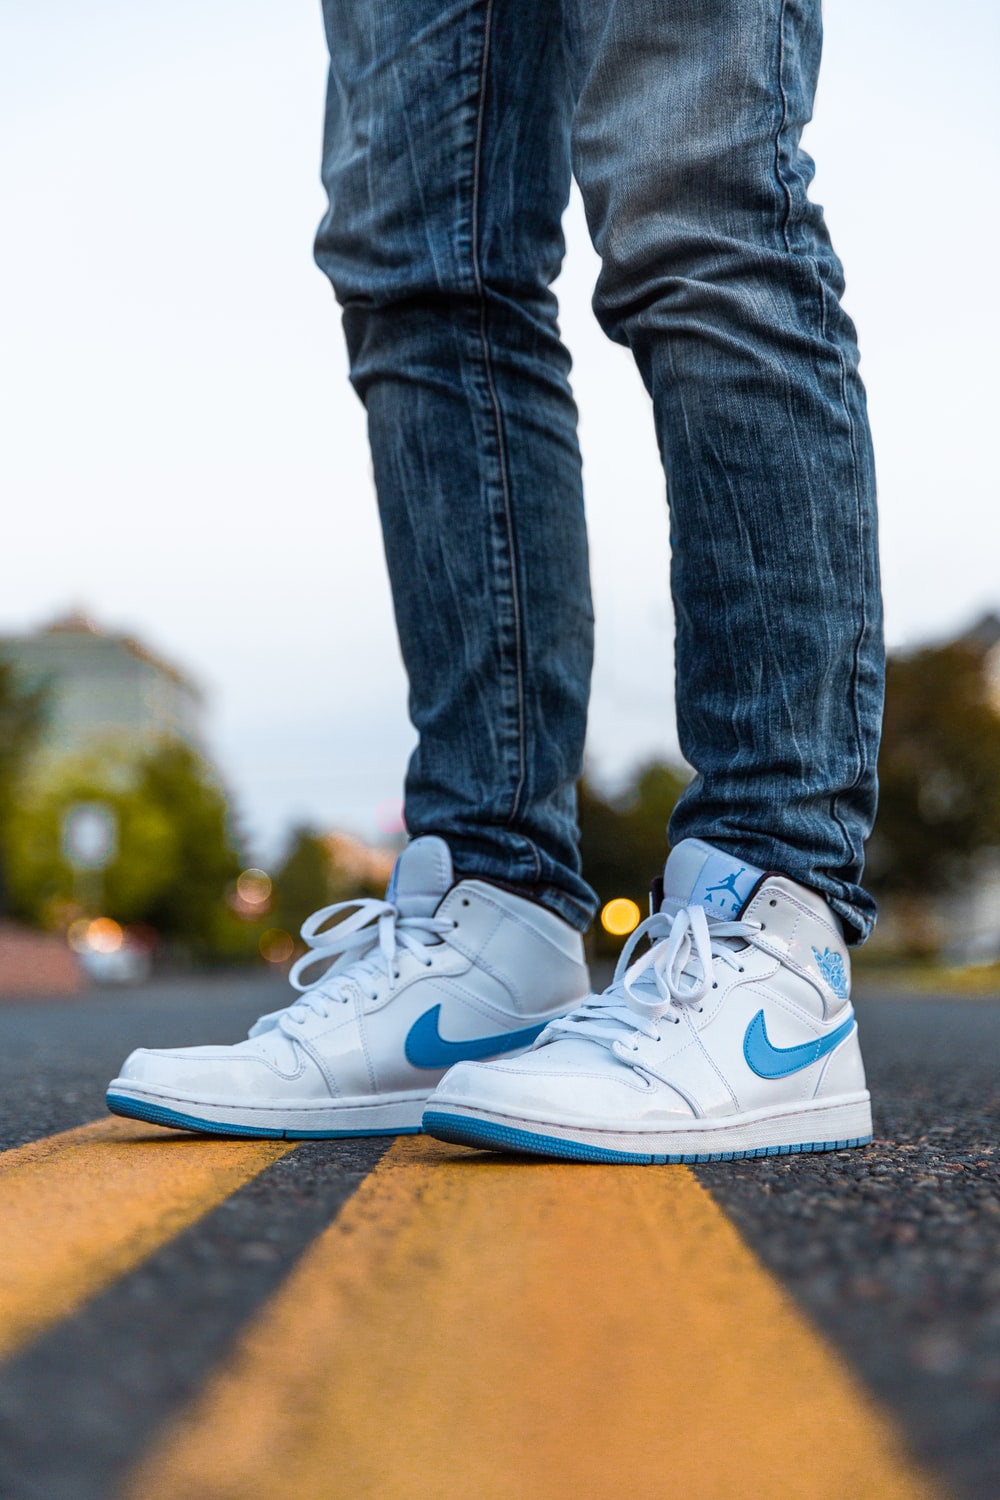 Blue Shoes Picture. Download Free Image